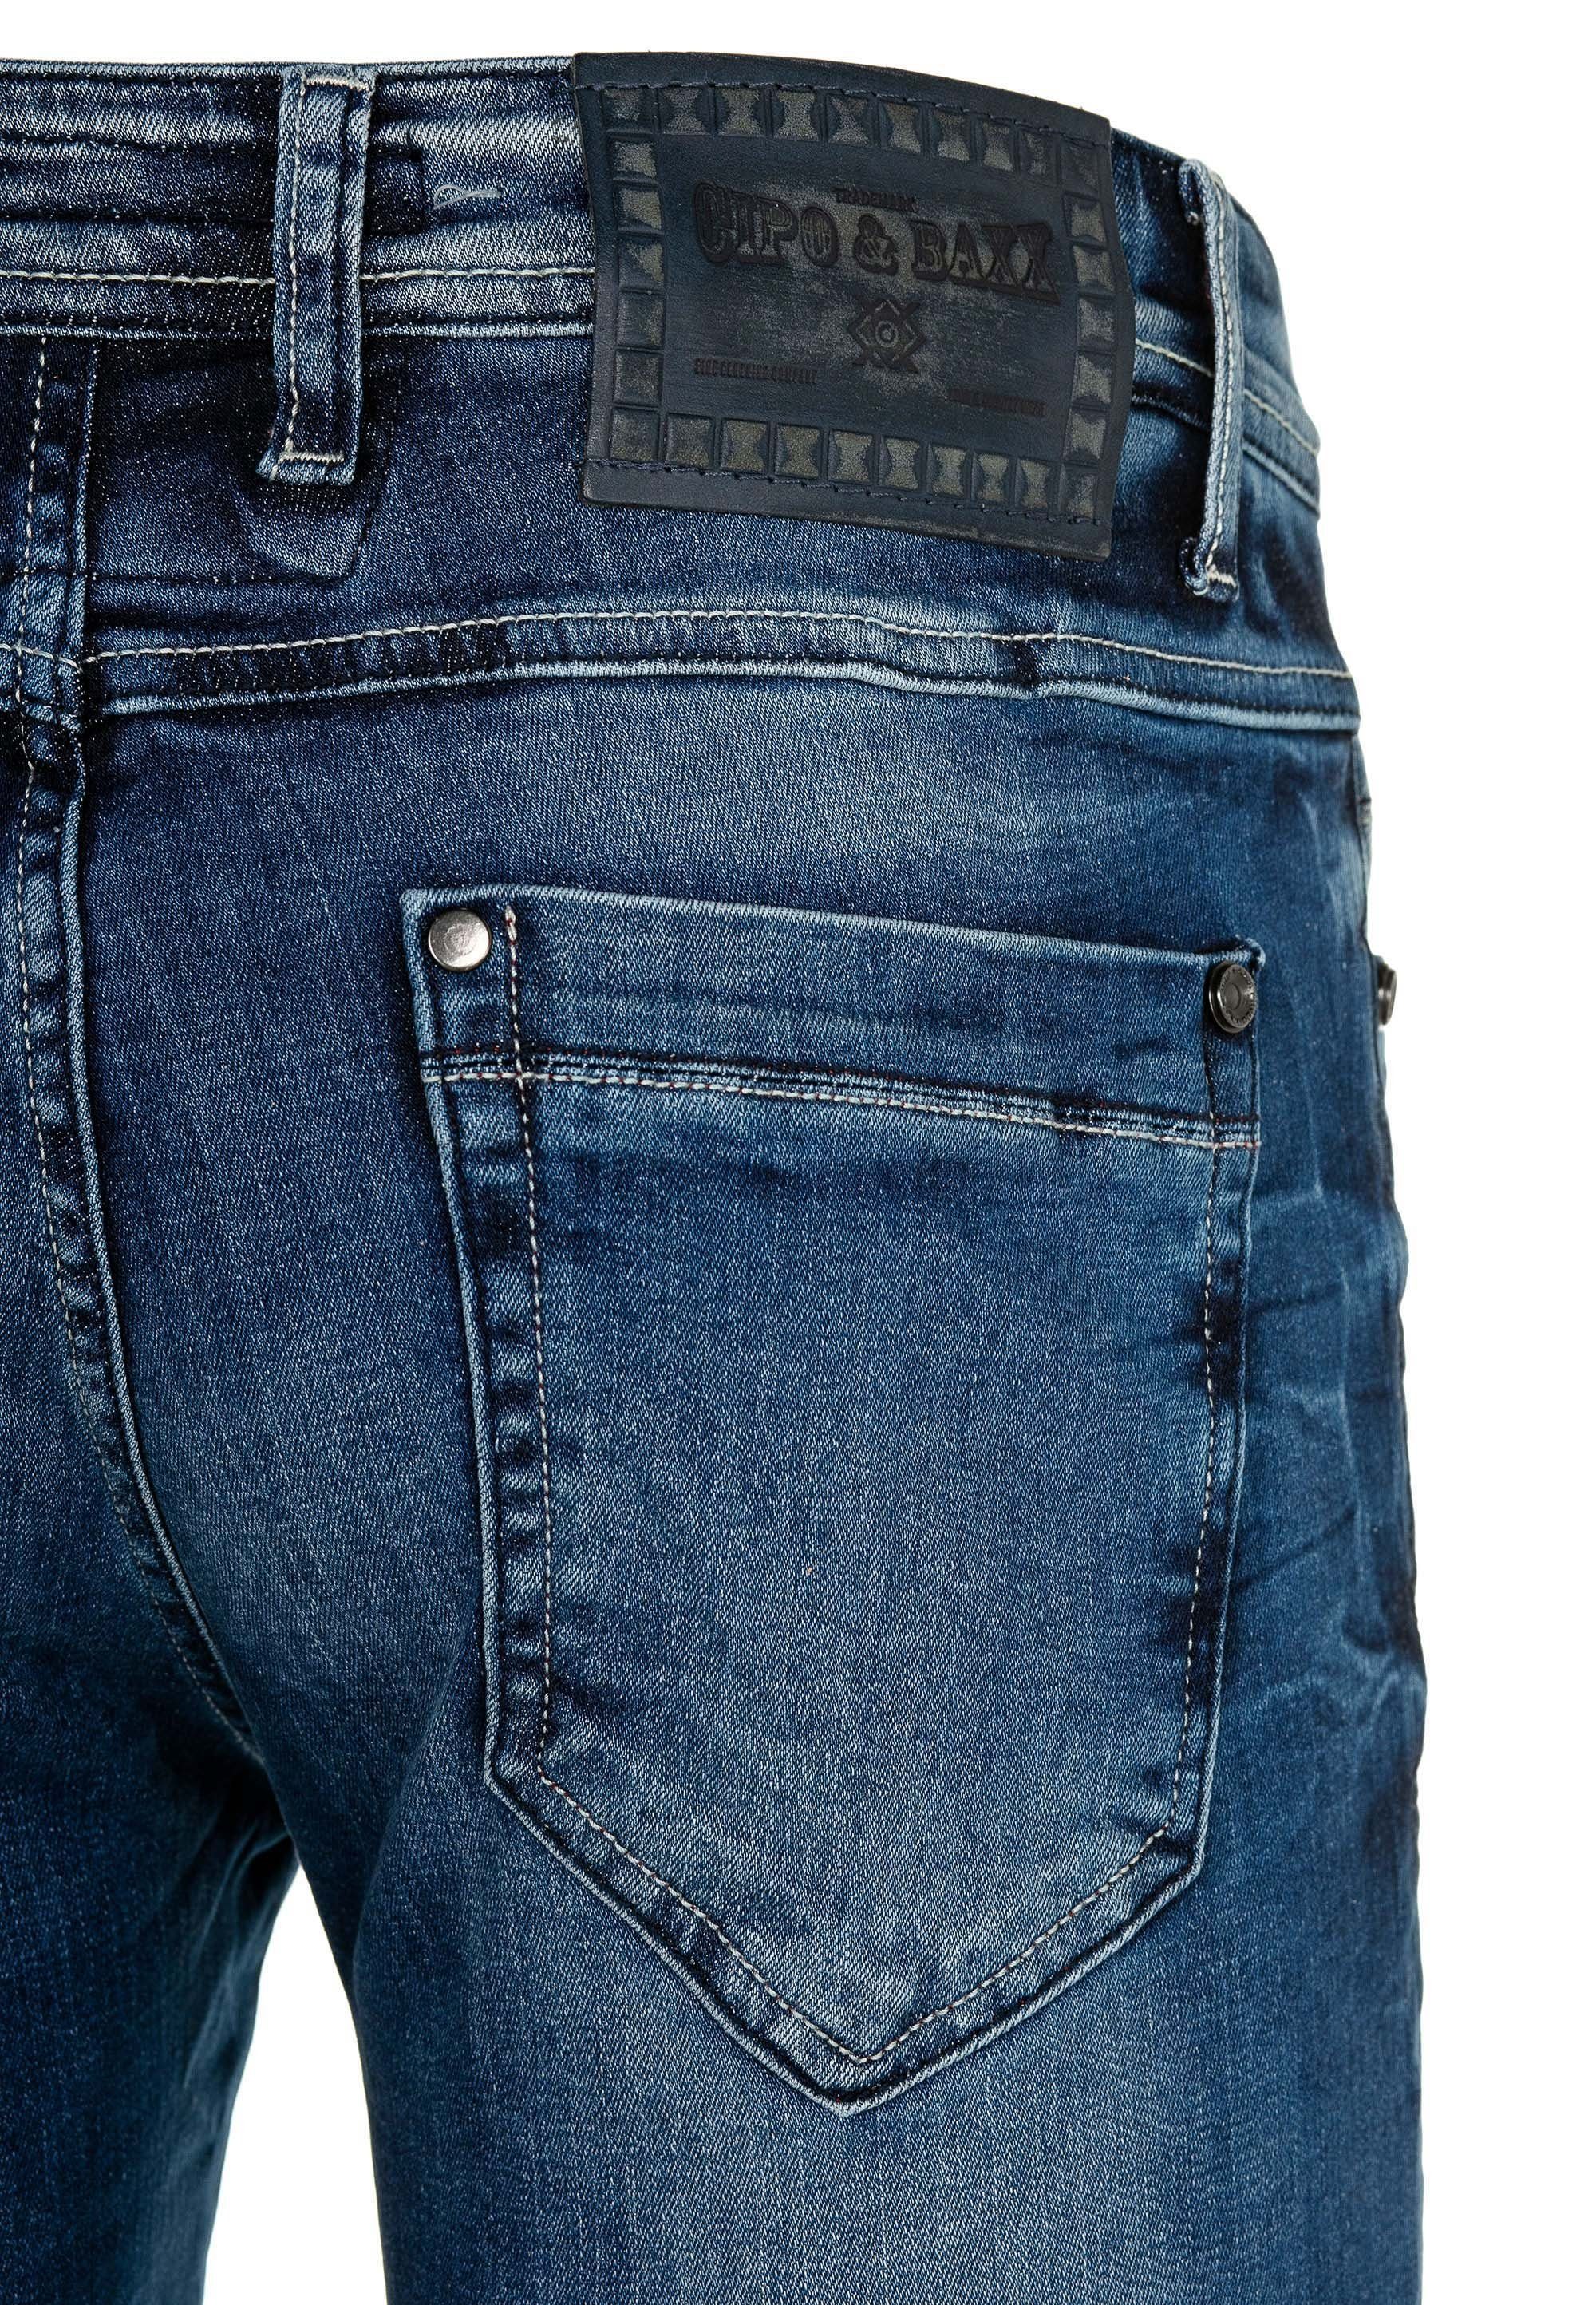 Waschung & Baxx Cipo Fit mit Straight in Slim-fit-Jeans cooler